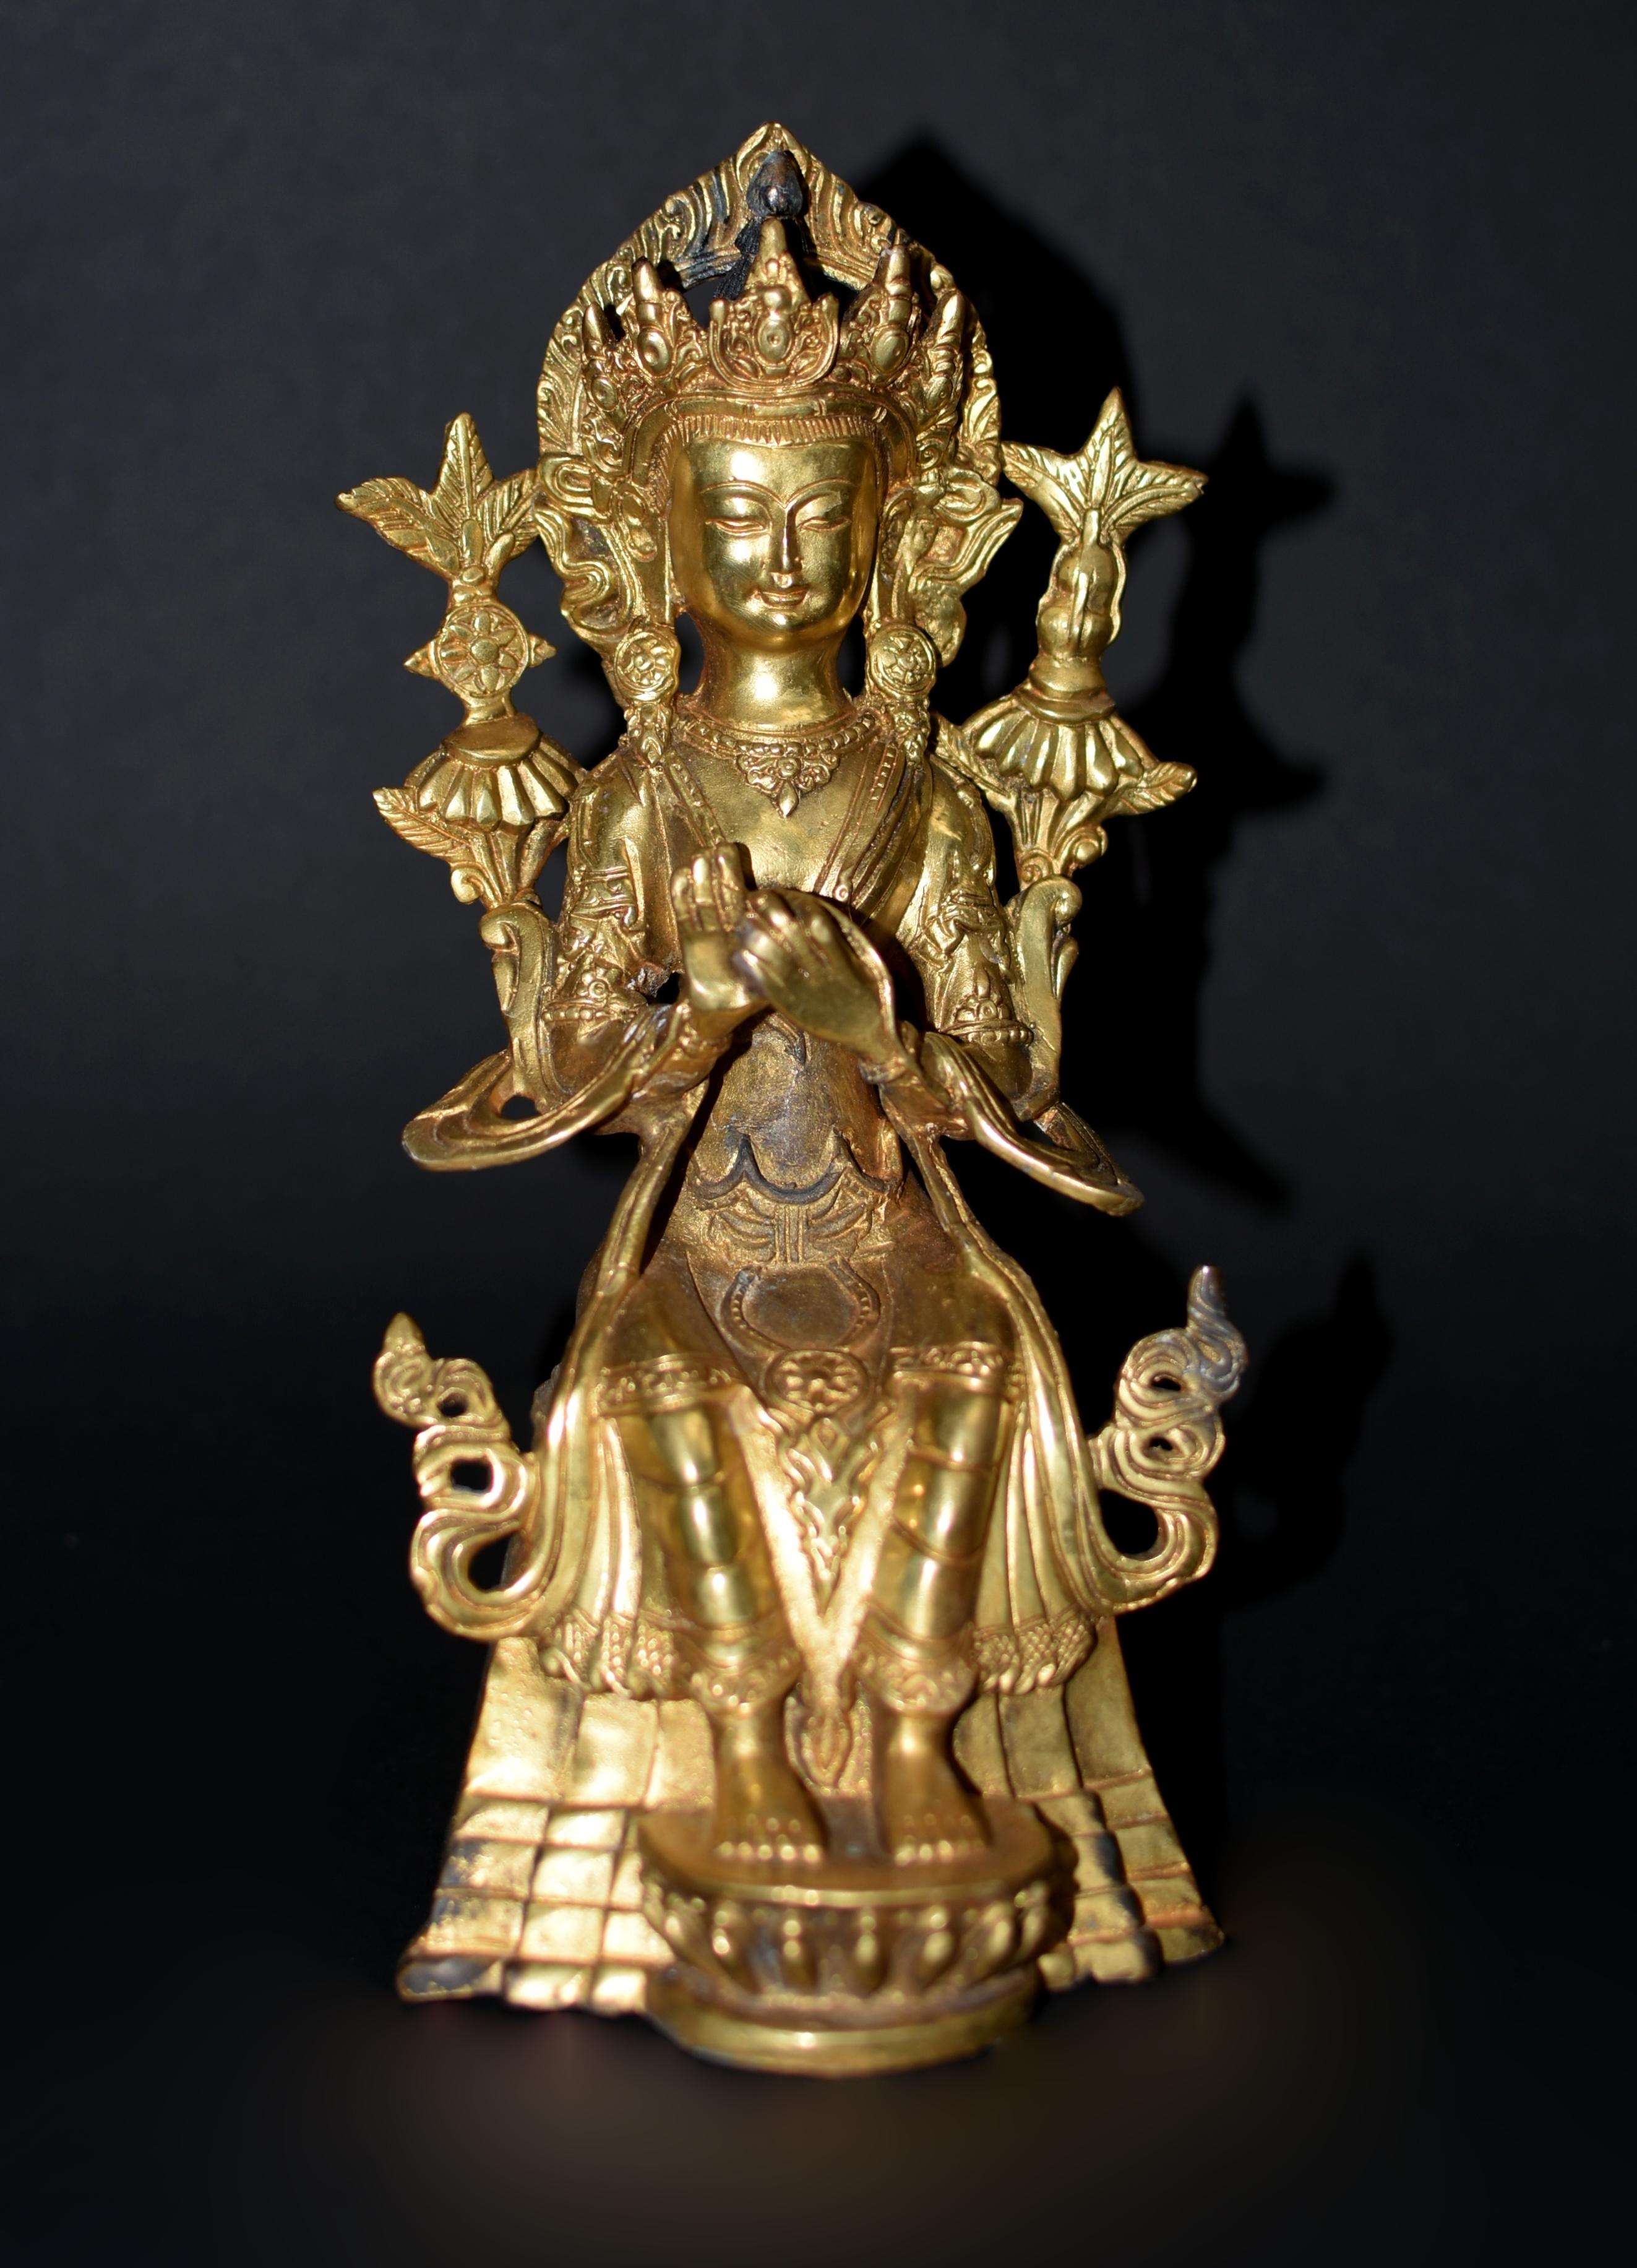 A special statue of the Tibetan Bodhisattva Maitreya, the Future Buddha. Depicted sitting on a high lotus throne, wearing a large decorated crown before a flame-shaped mandola and pair of flower posts, long earrings that touch the shoulders and